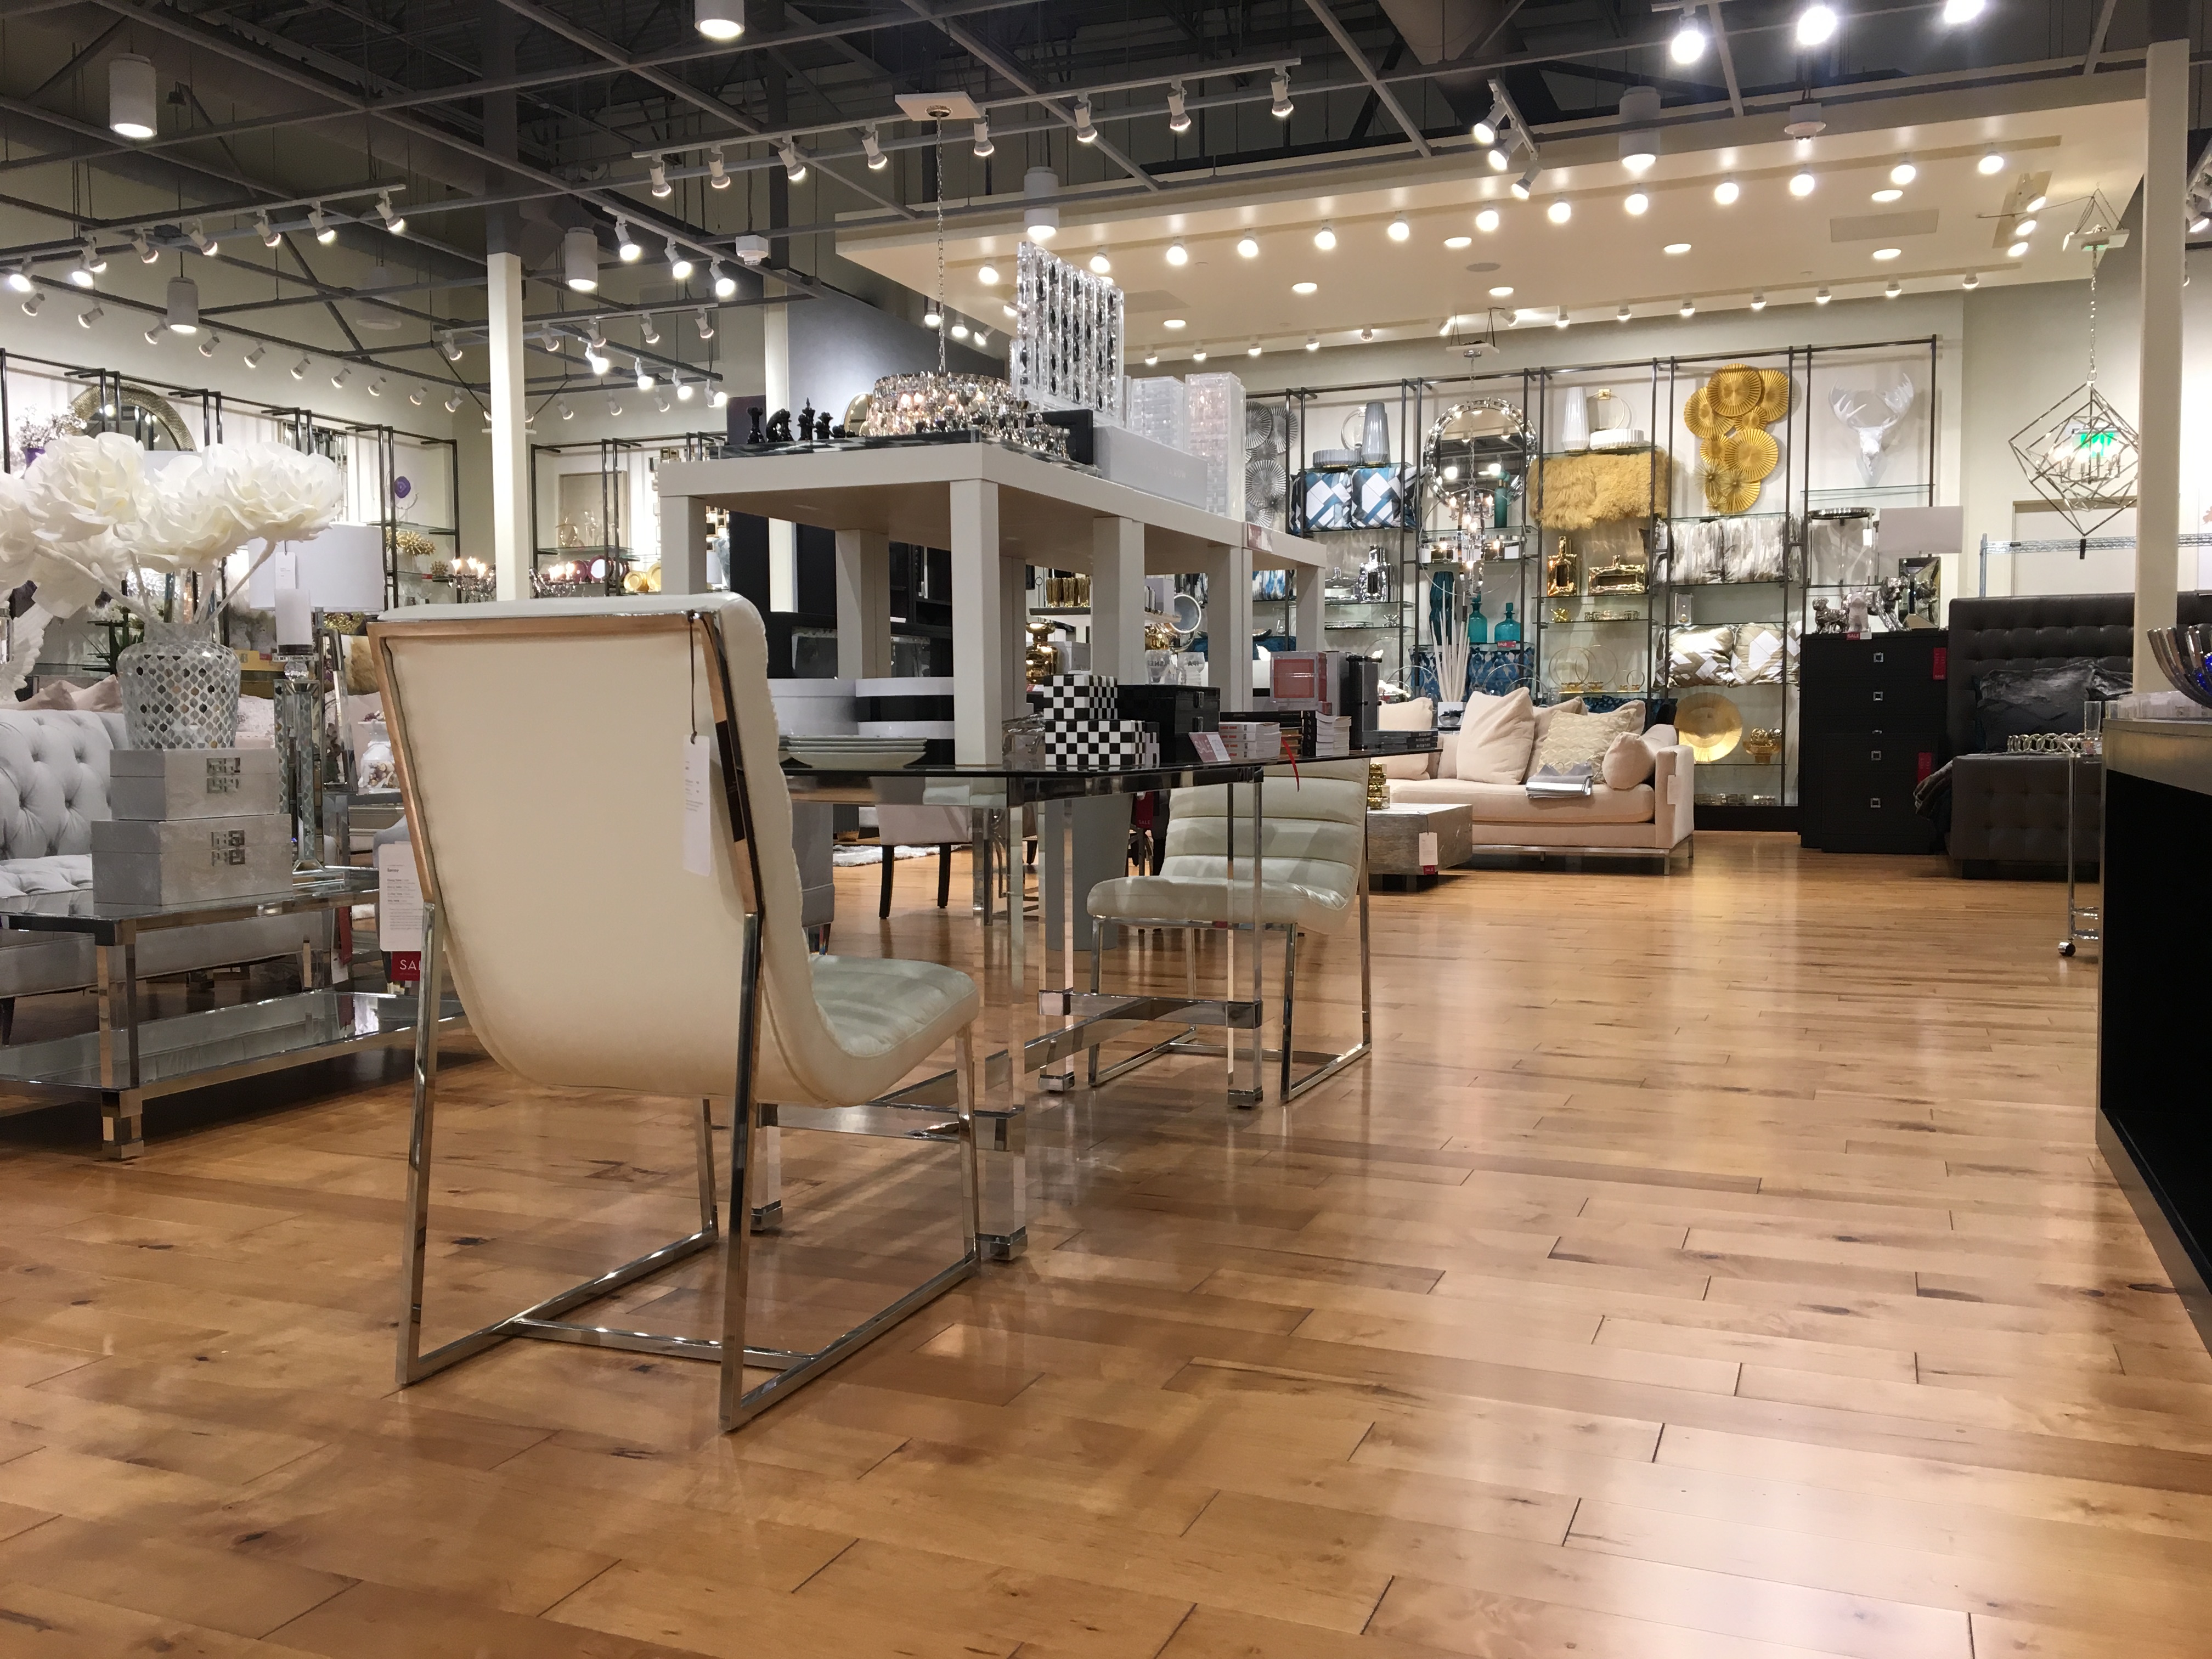 Z Gallerie in the Galleria Edina, MN - store constructed by Retail Construction Services, Inc.